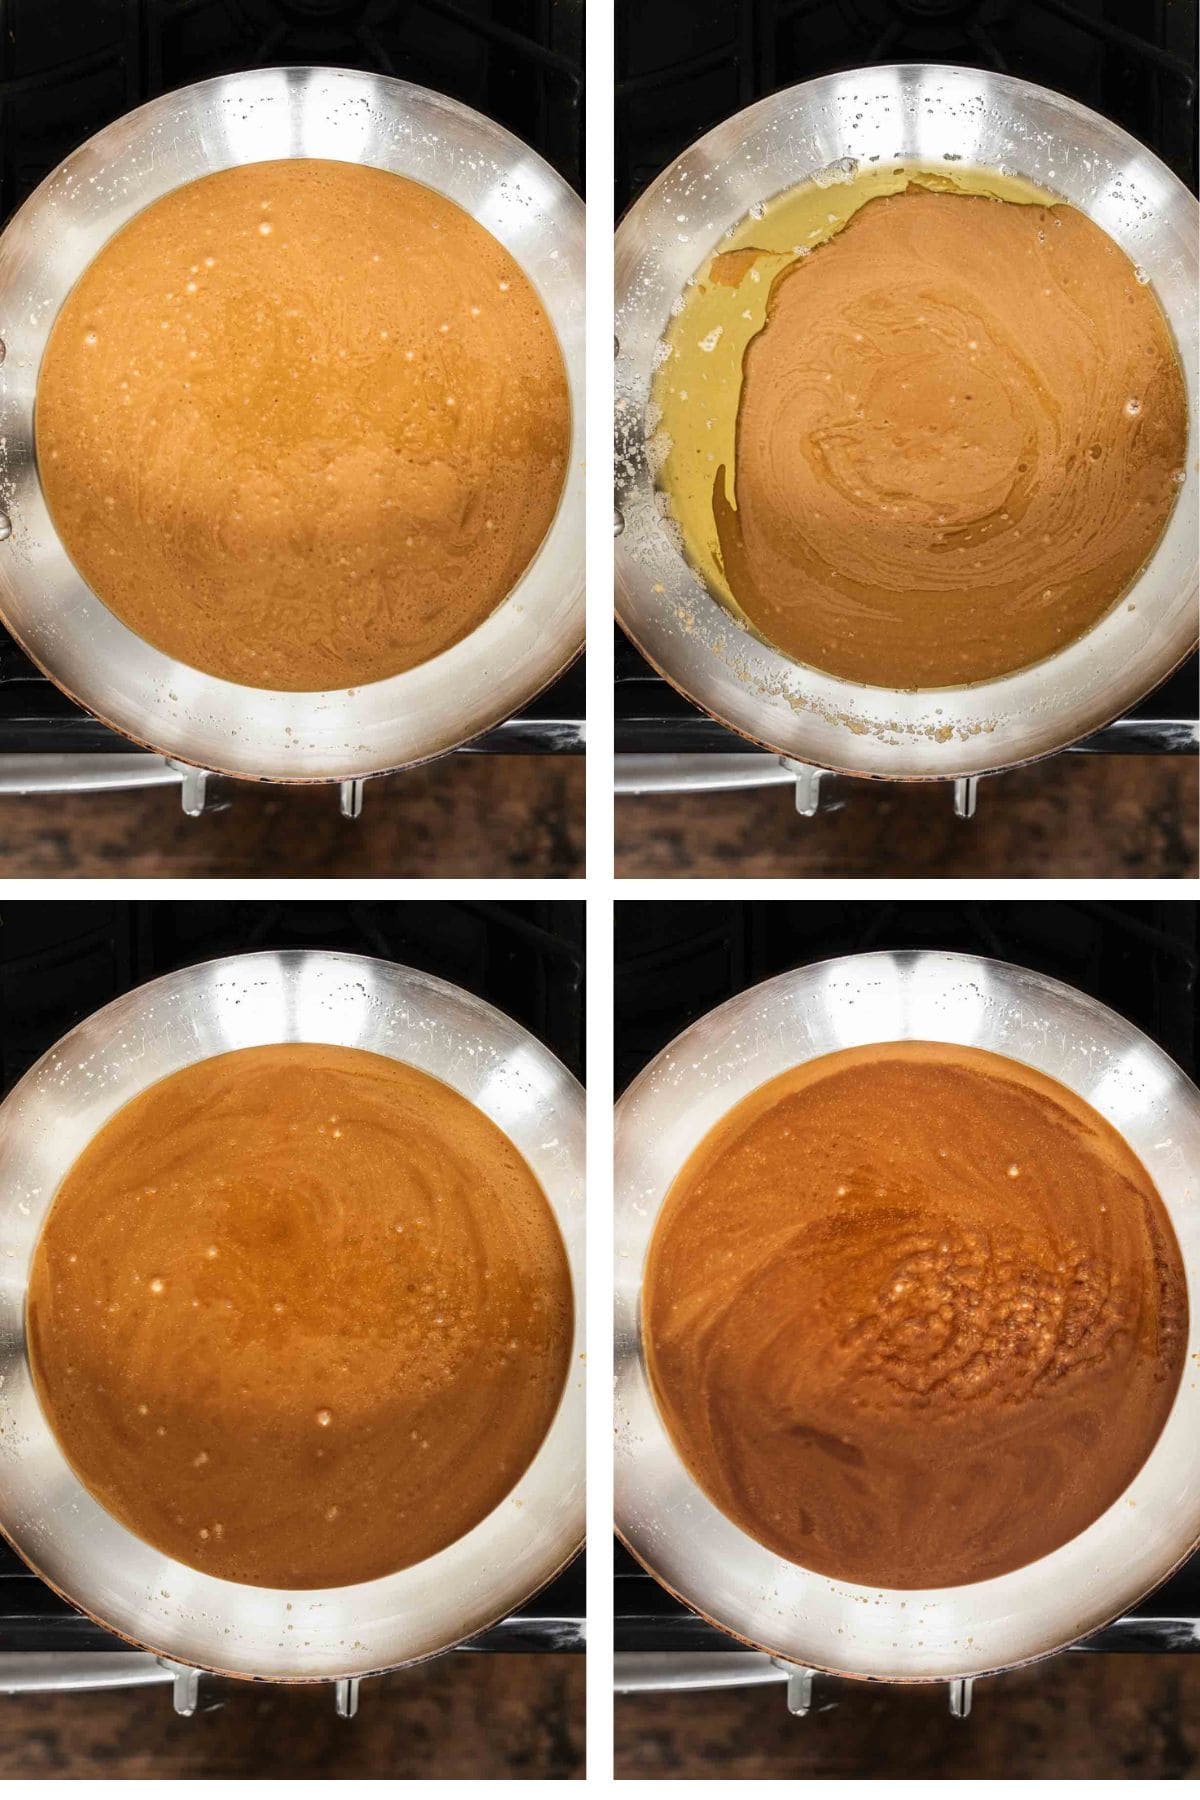 Four images showing the middle steps of preparing salted caramel sauce, including browning caramel, mixing until sugar and butter emulsify, and letting sugar turn a deep copper brown color.